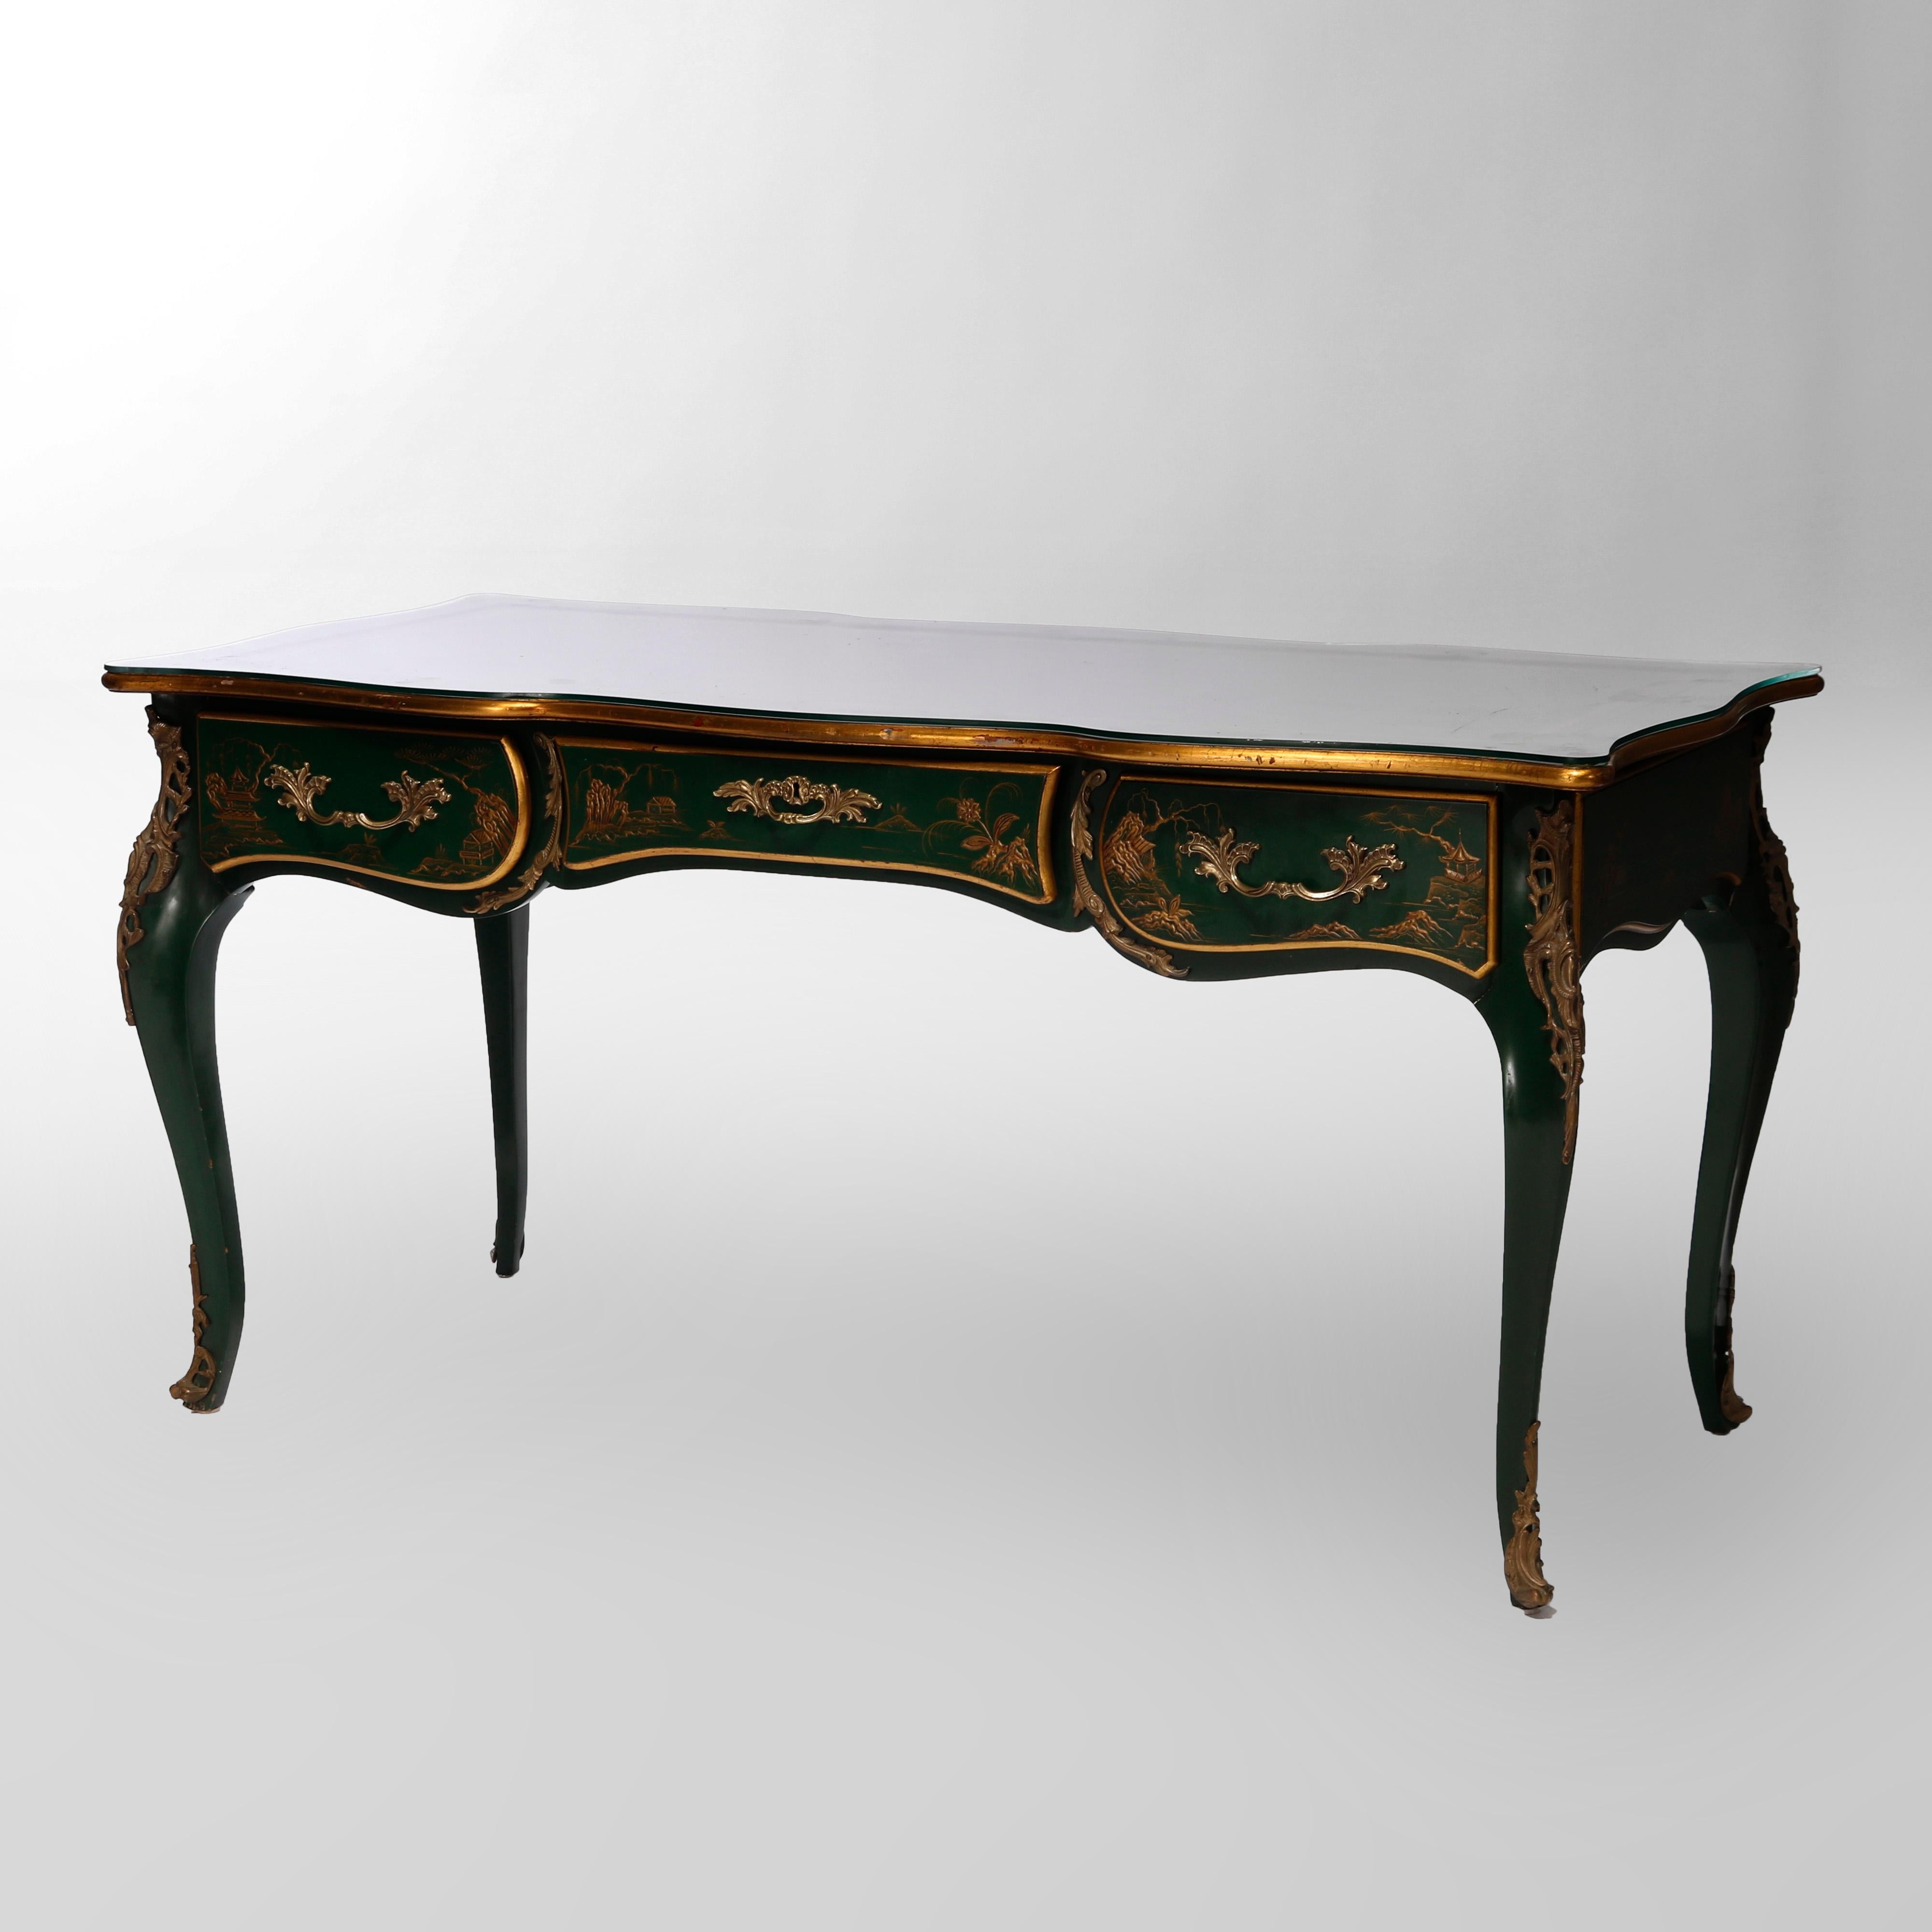 A bureau plat desk by Karges offers shaped top having gilt decorated leather writing surface and gilt trim over Chinoiserie decorated base having single drawer, raised on cabriole legs, foliate cast ormolu mounts throughout, maker label on drawer